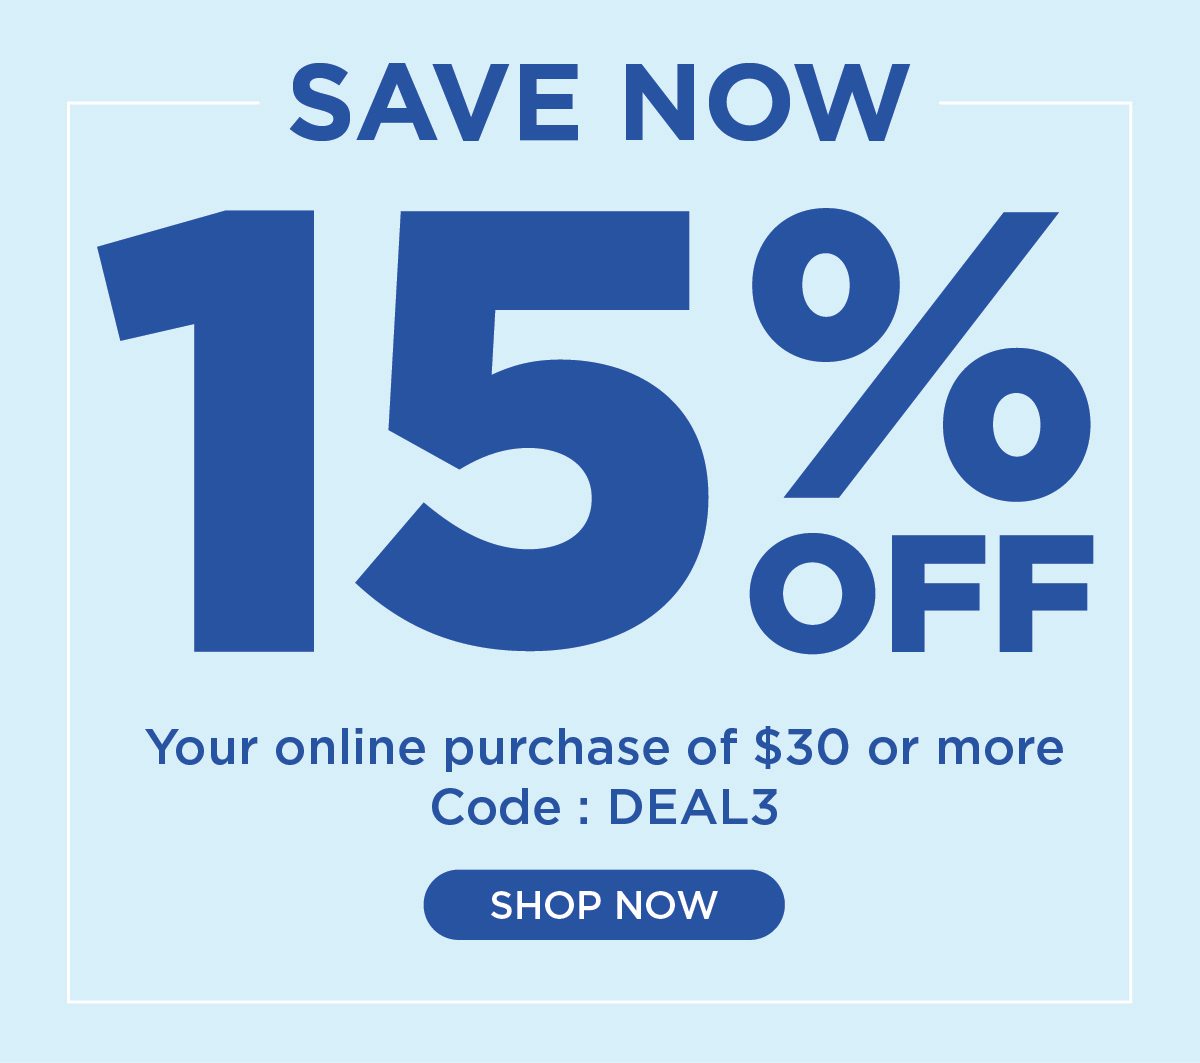 Save 15% off $30 with code DEAL3